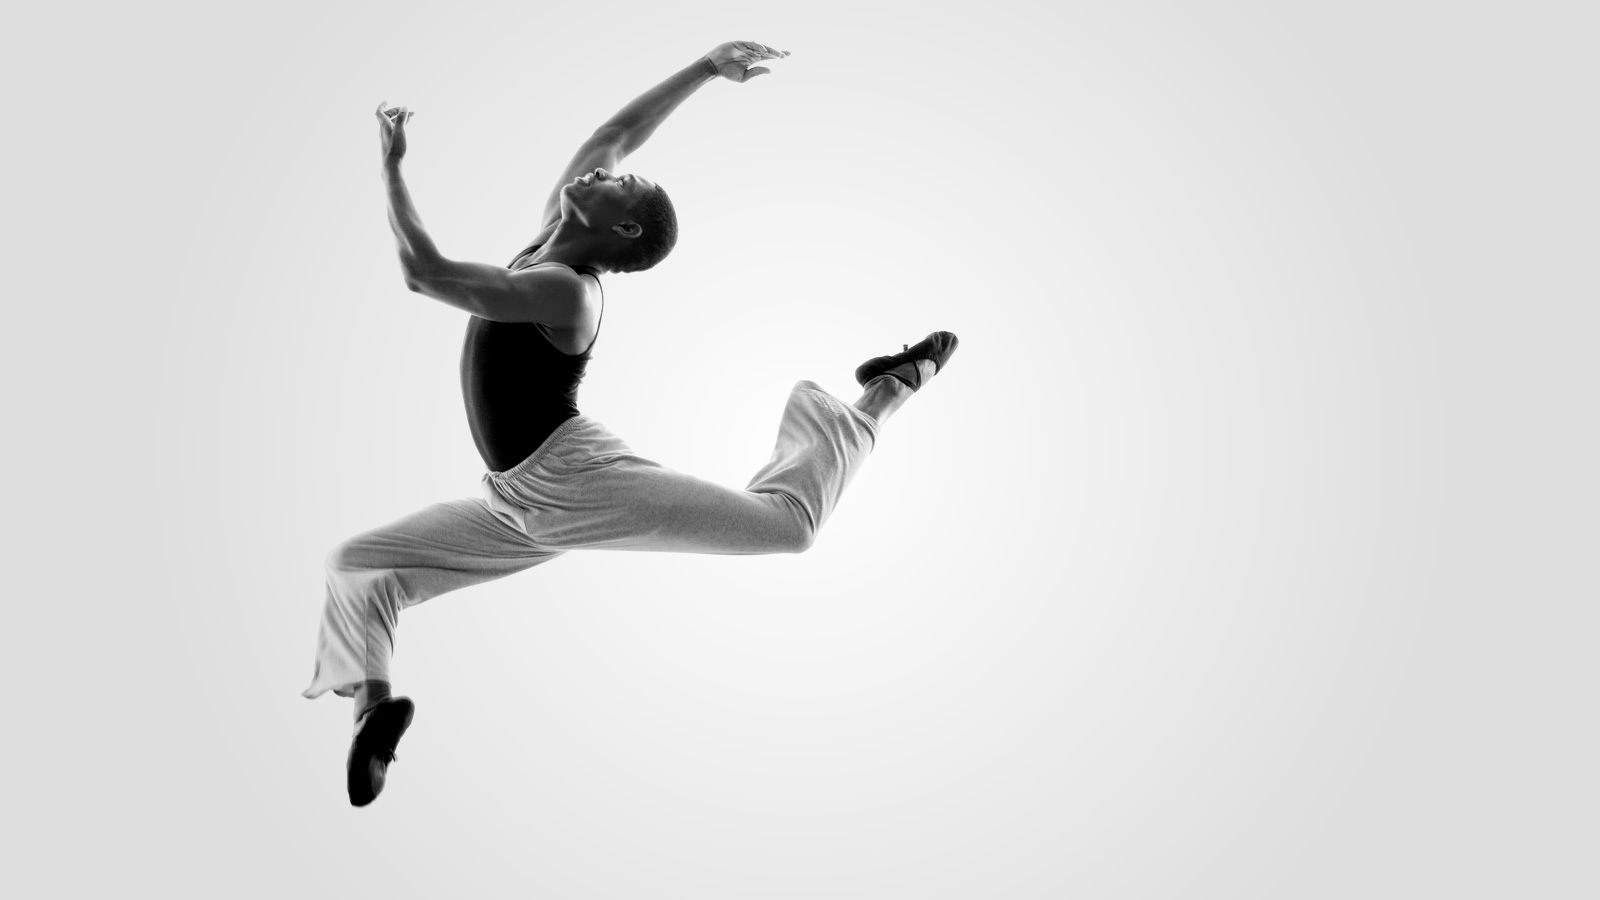 A male dancer in mid-leap